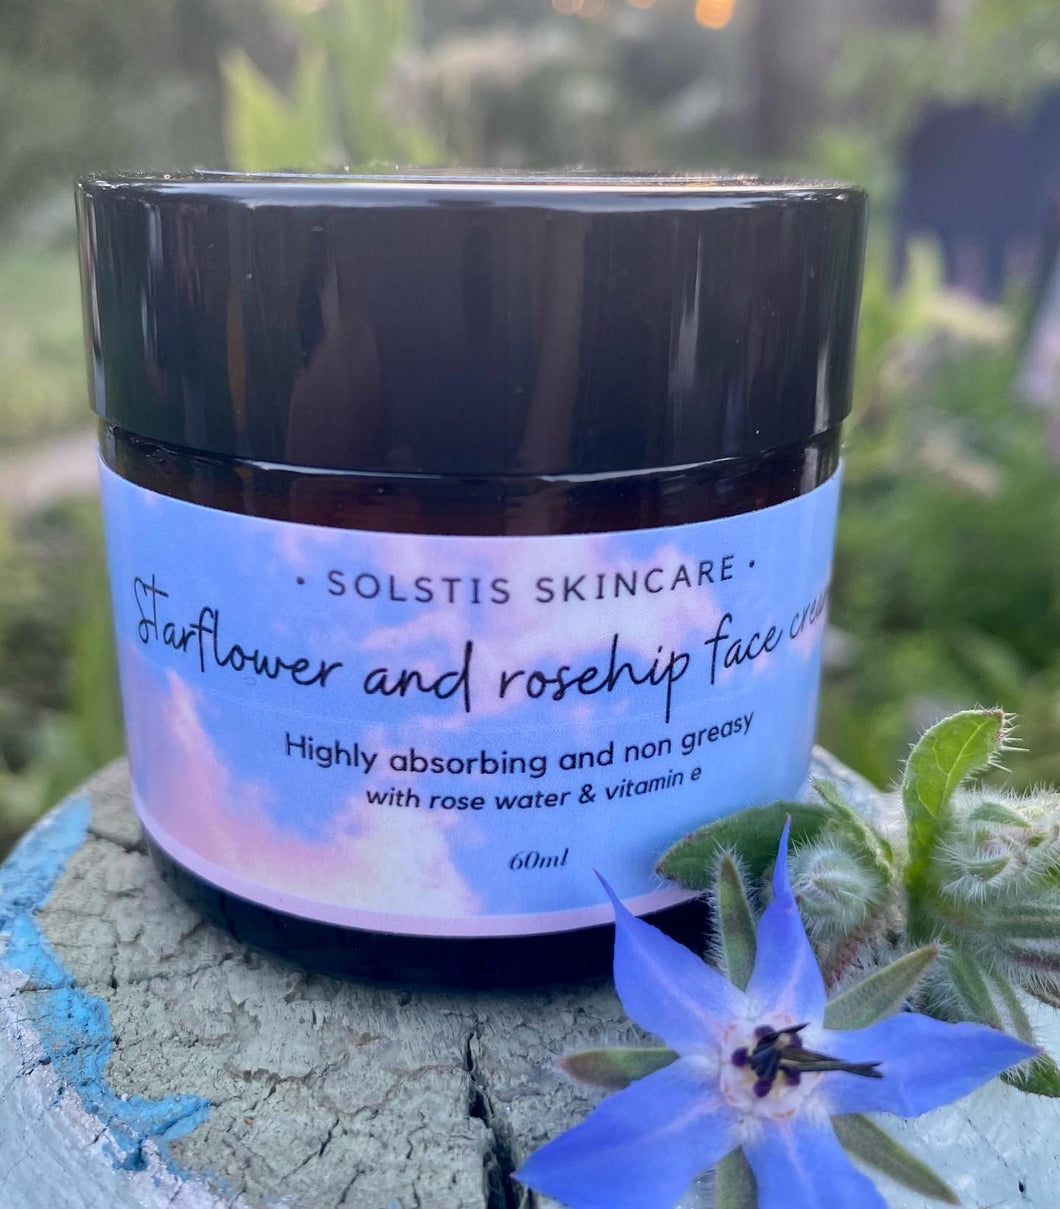 Starflower & Rosehip face cream with Carrot seed oil and Vitamin E